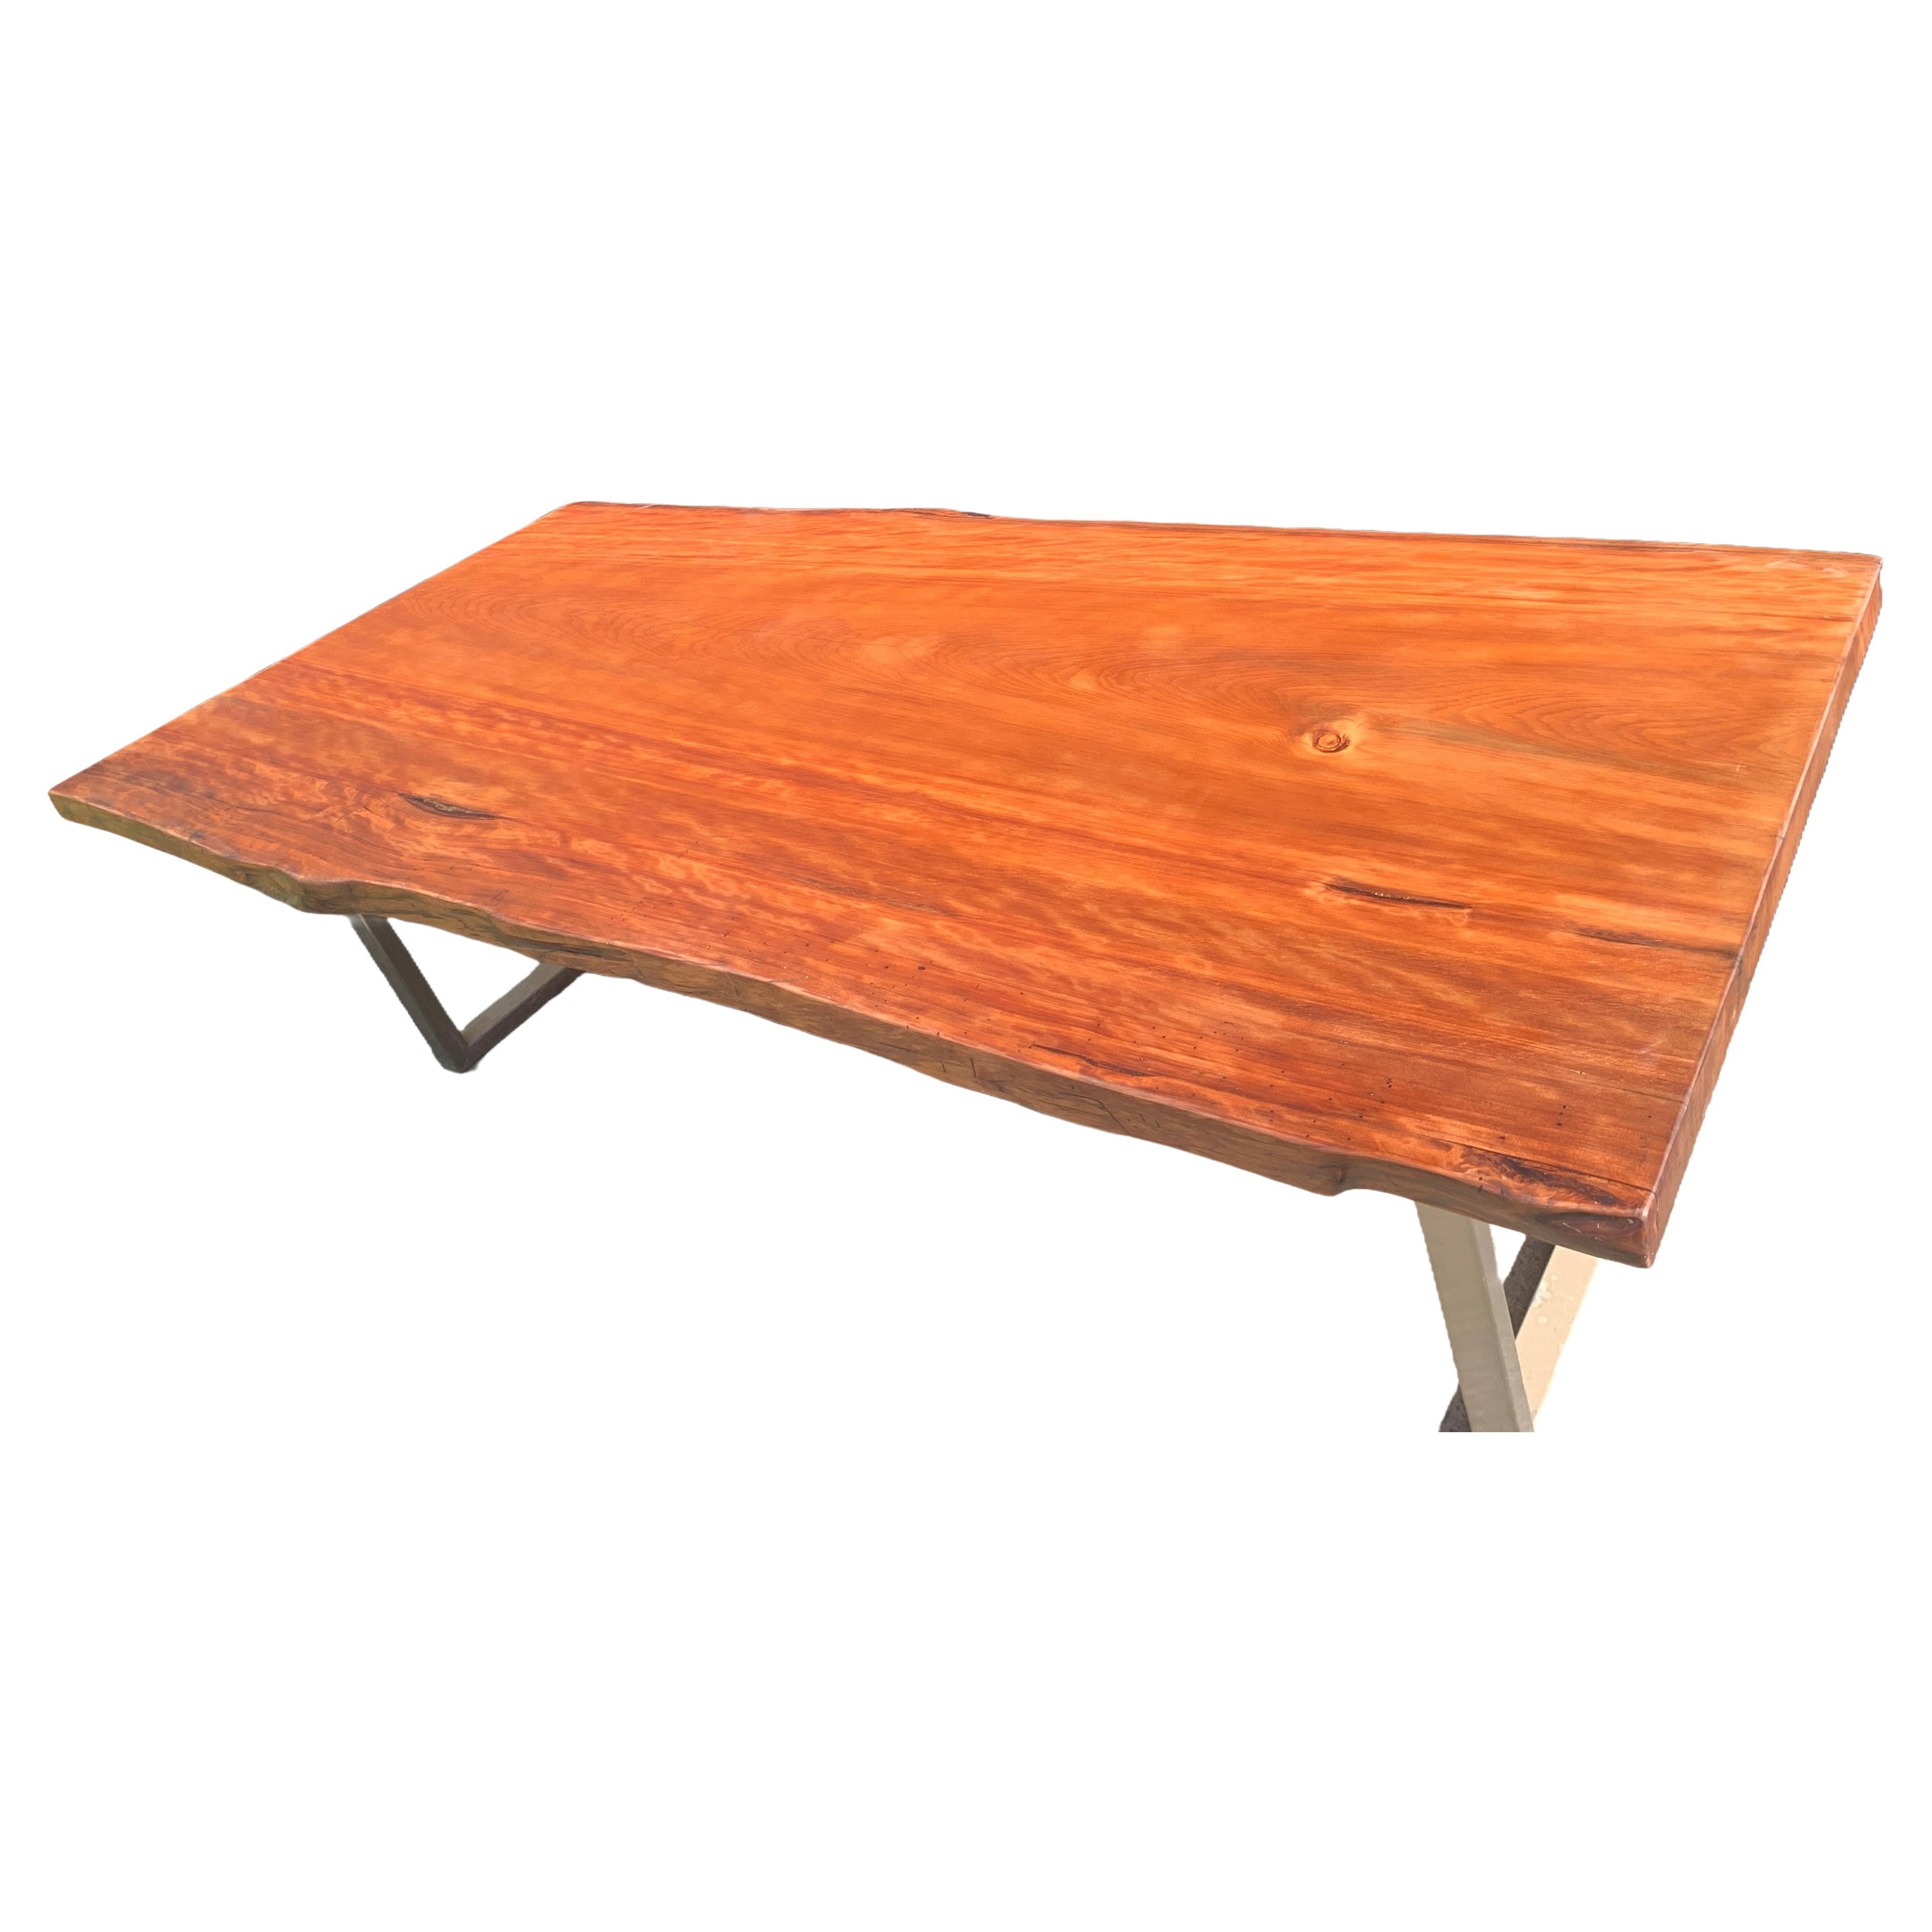 Kauri Round Dining Table 2.4m x 1.2m in Solid Ancient Kauri Wood For Sale